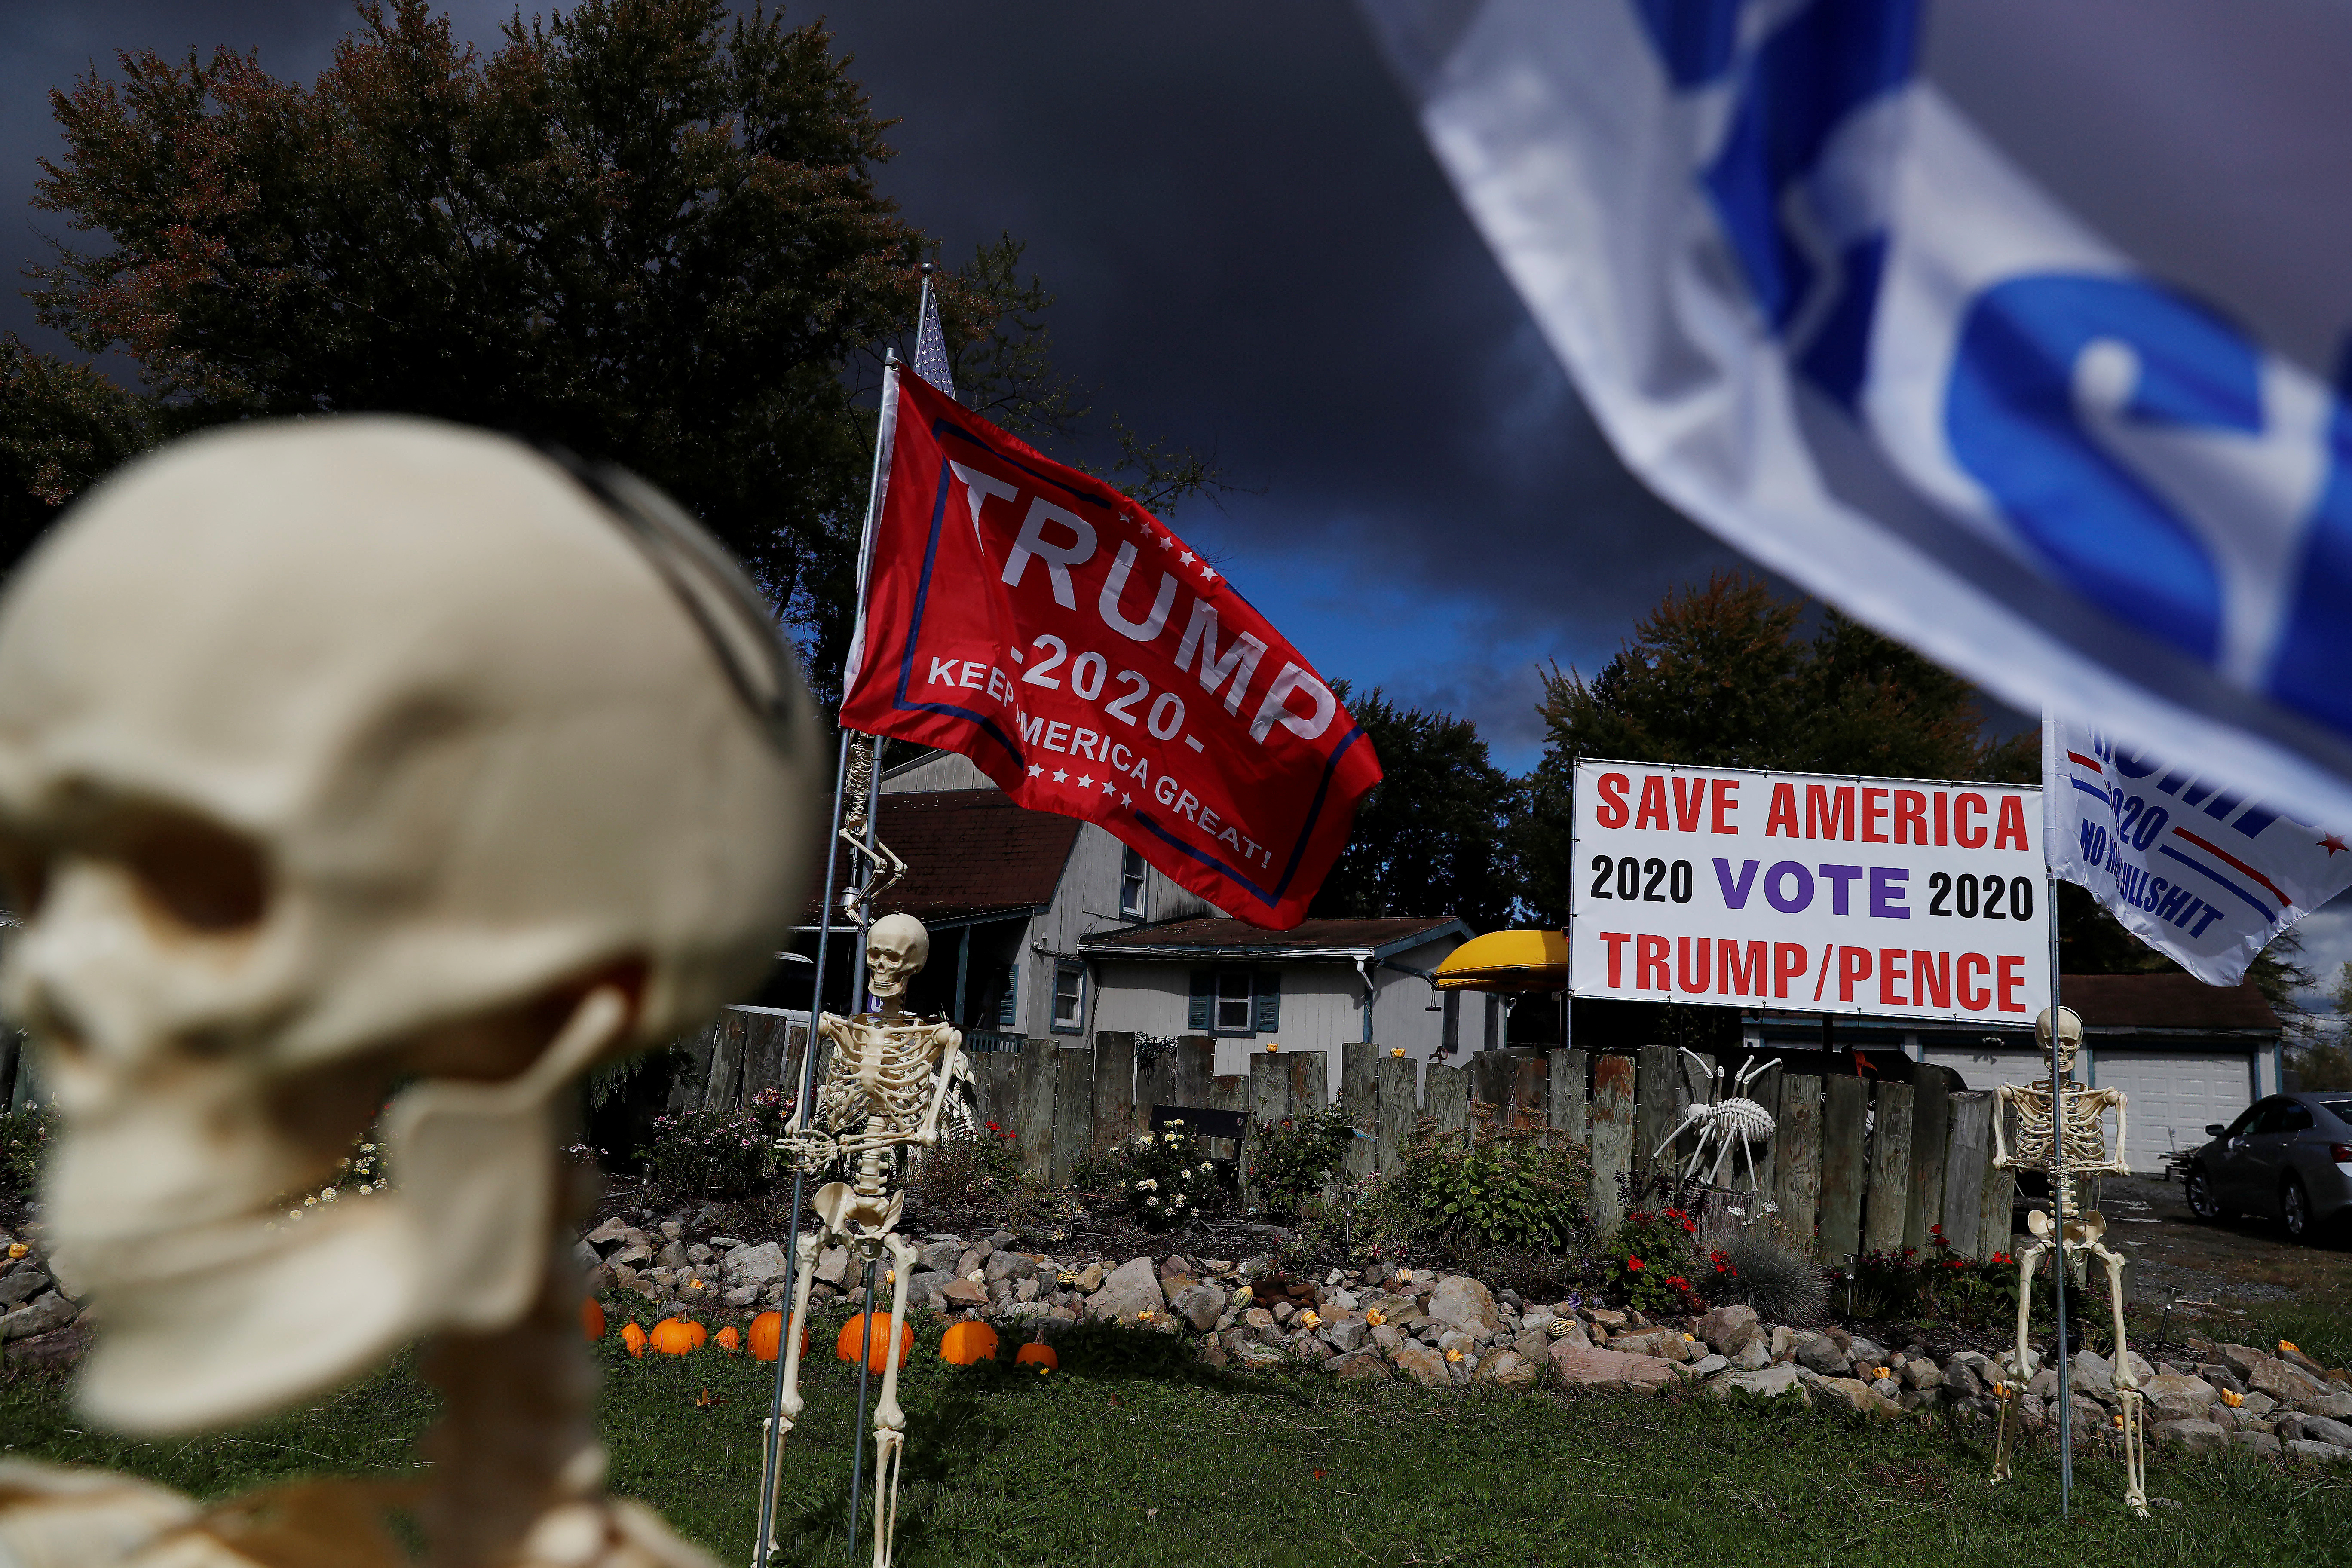 Halloween decorations and support for U.S. President Donald Trump are seen in the front of supporter Maranda Joseph's yard in Warren, Ohio, U.S., October 2, 2020. REUTERS/Shannon Stapleton